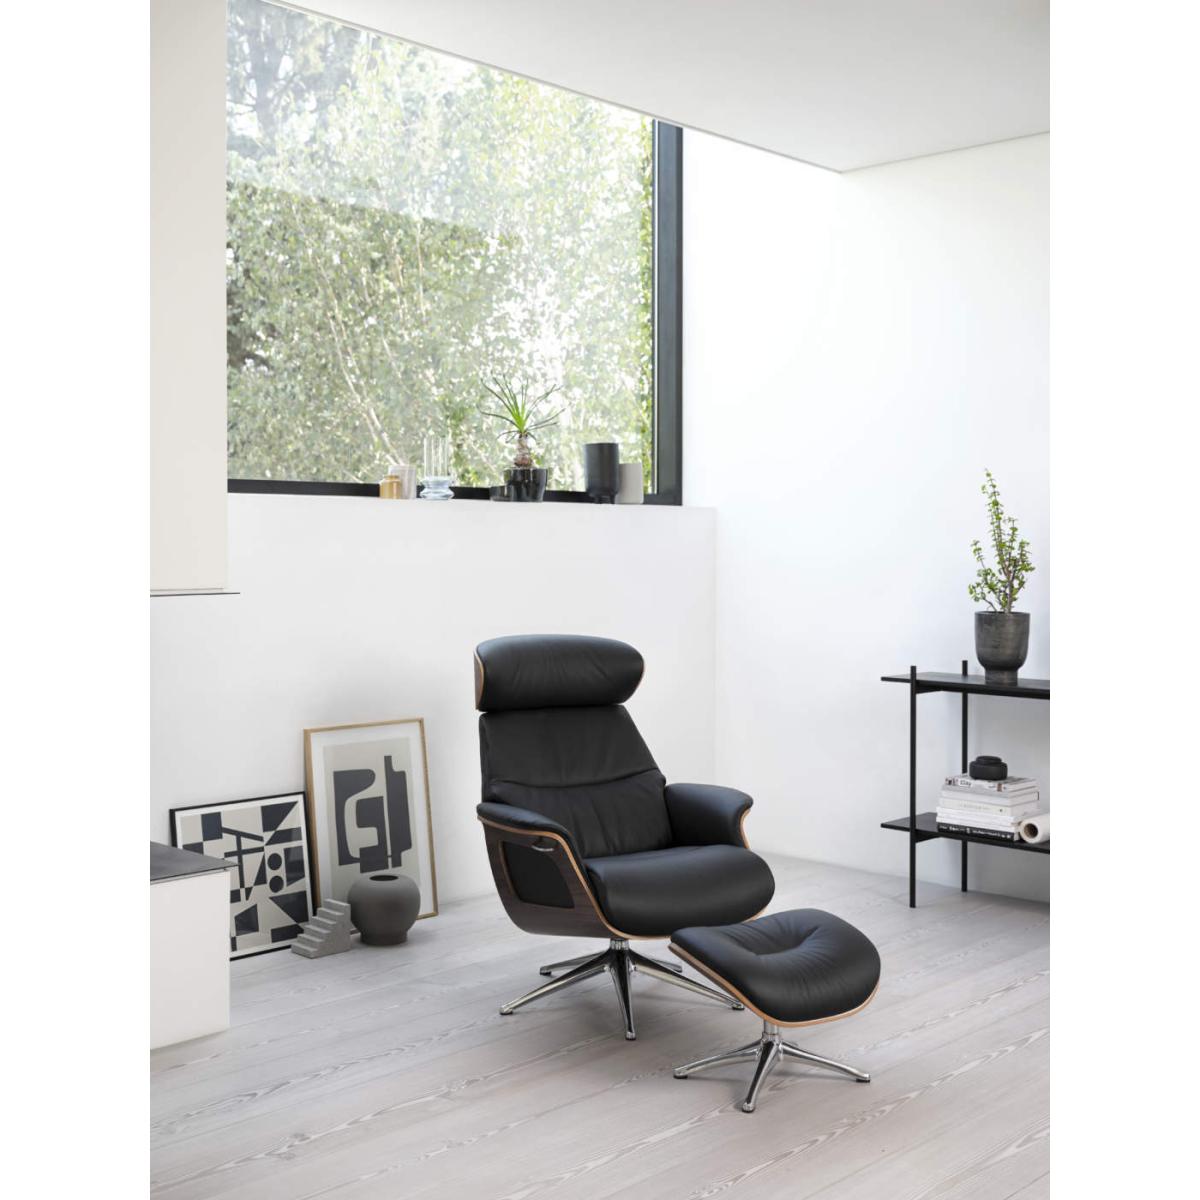 CLEMENT leather relax chair | InnoConcept